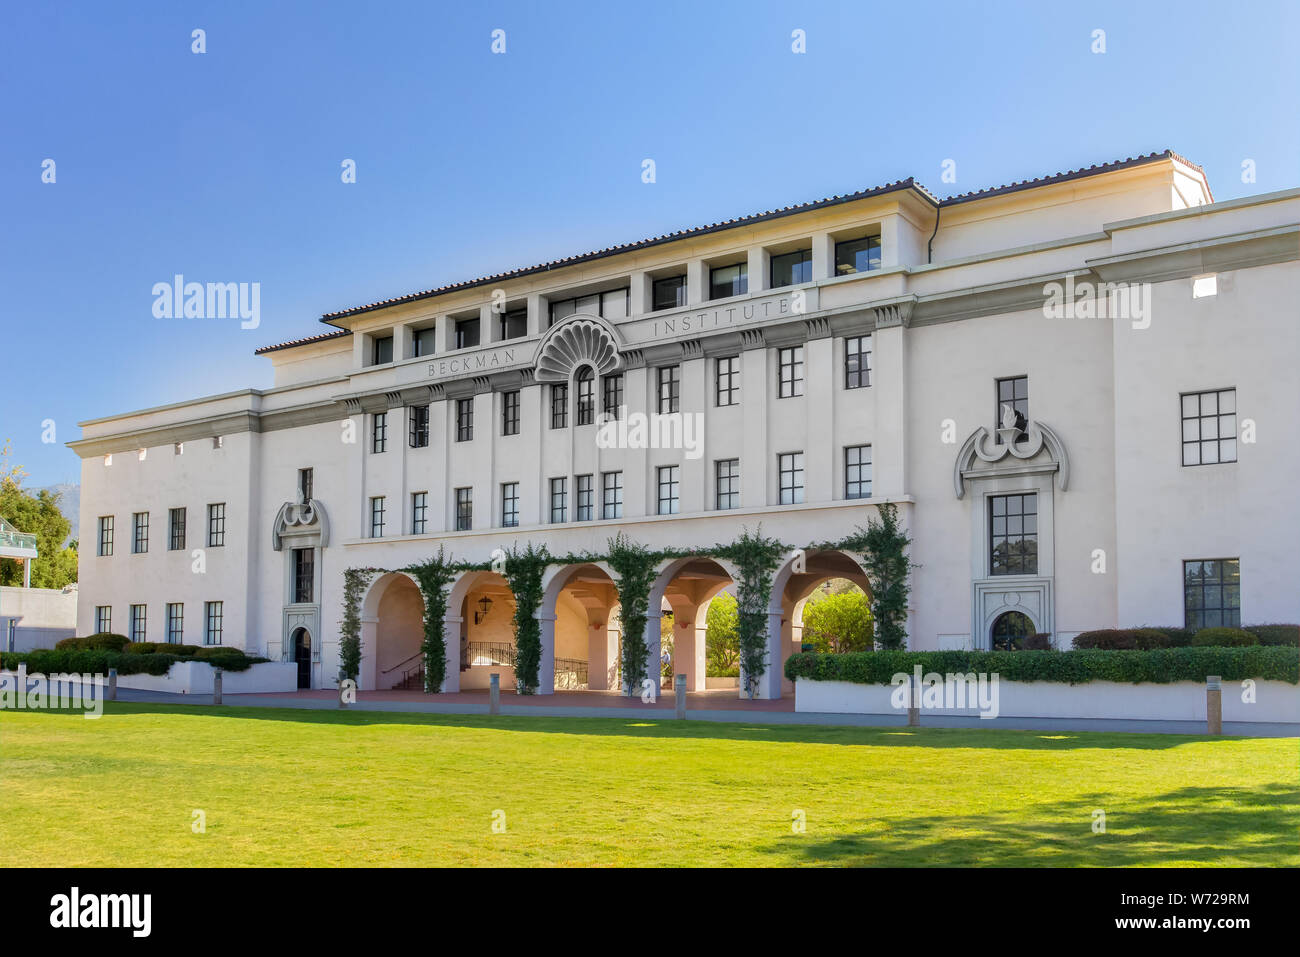 PASADENA, CA/USA - October 1: Beckman Institute on the California Institute of Technology. Caltech is a research university in Pasadena, CA and home t Stock Photo